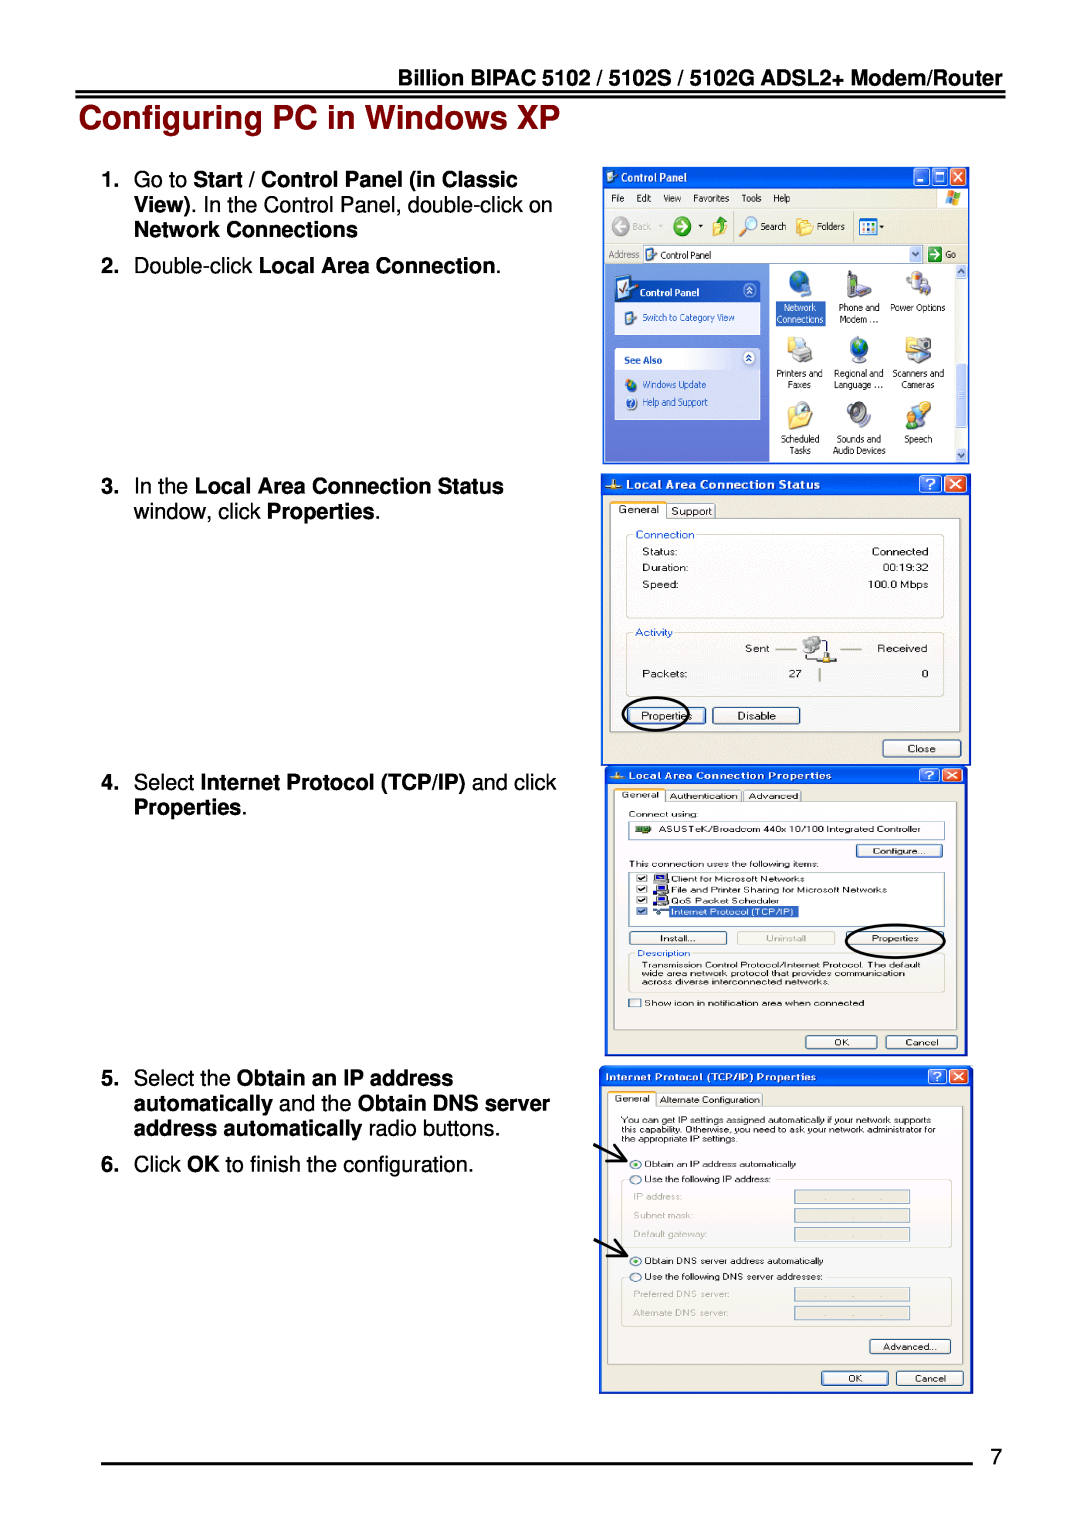 Billion Electric Company 5102G Configuring PC in Windows XP, In the Local Area Connection Status window, click Properties 